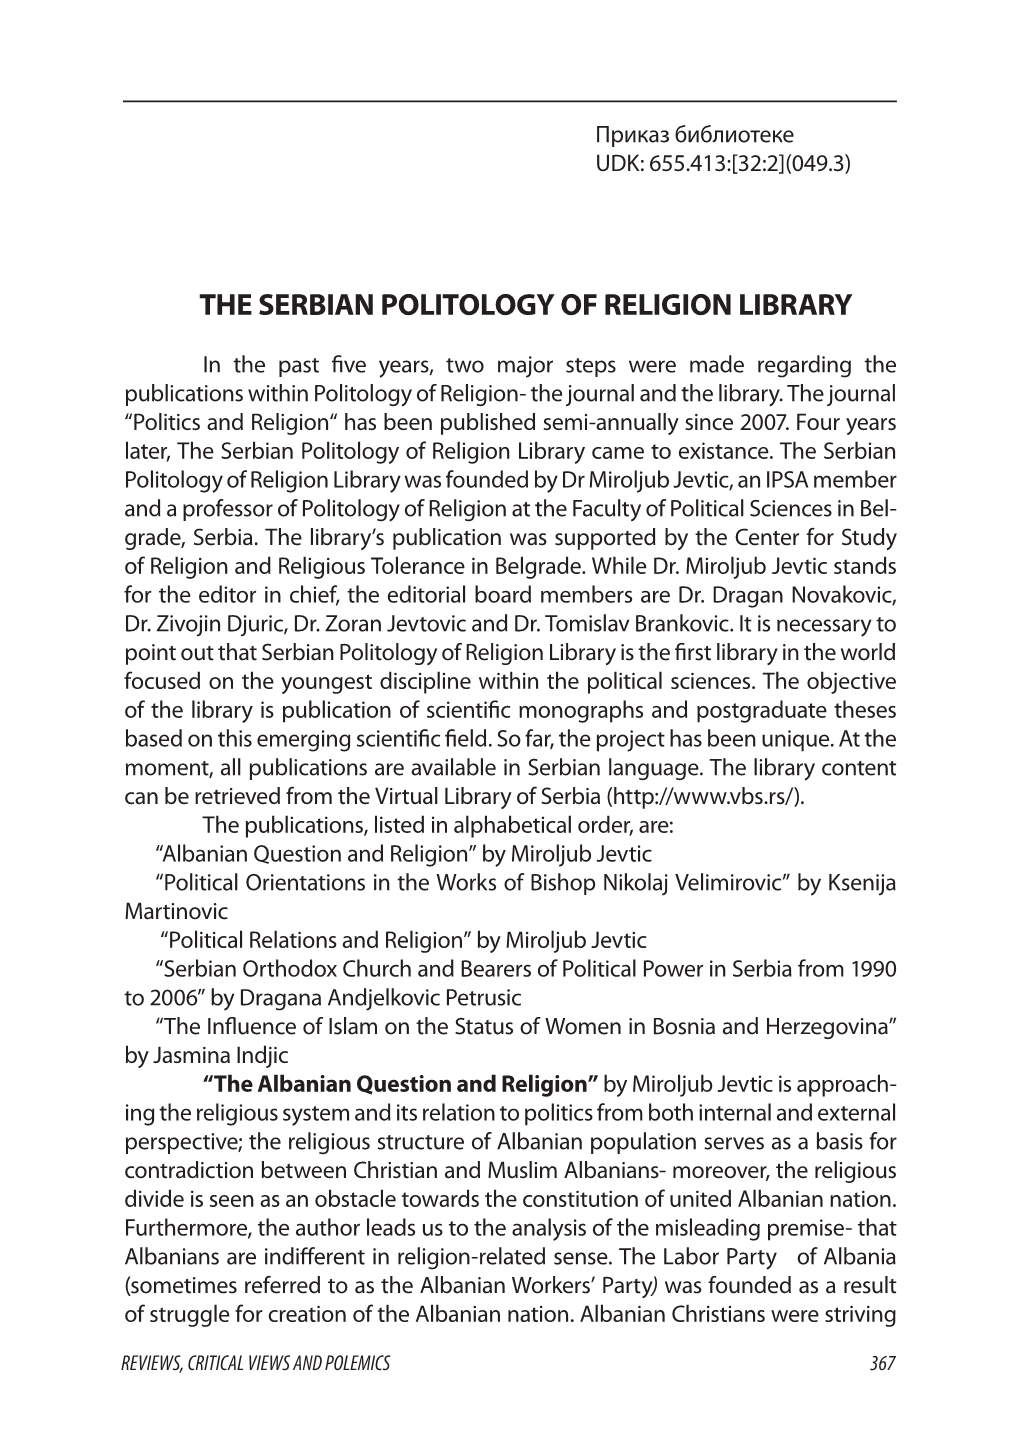 The Serbian Politology of Religion Library